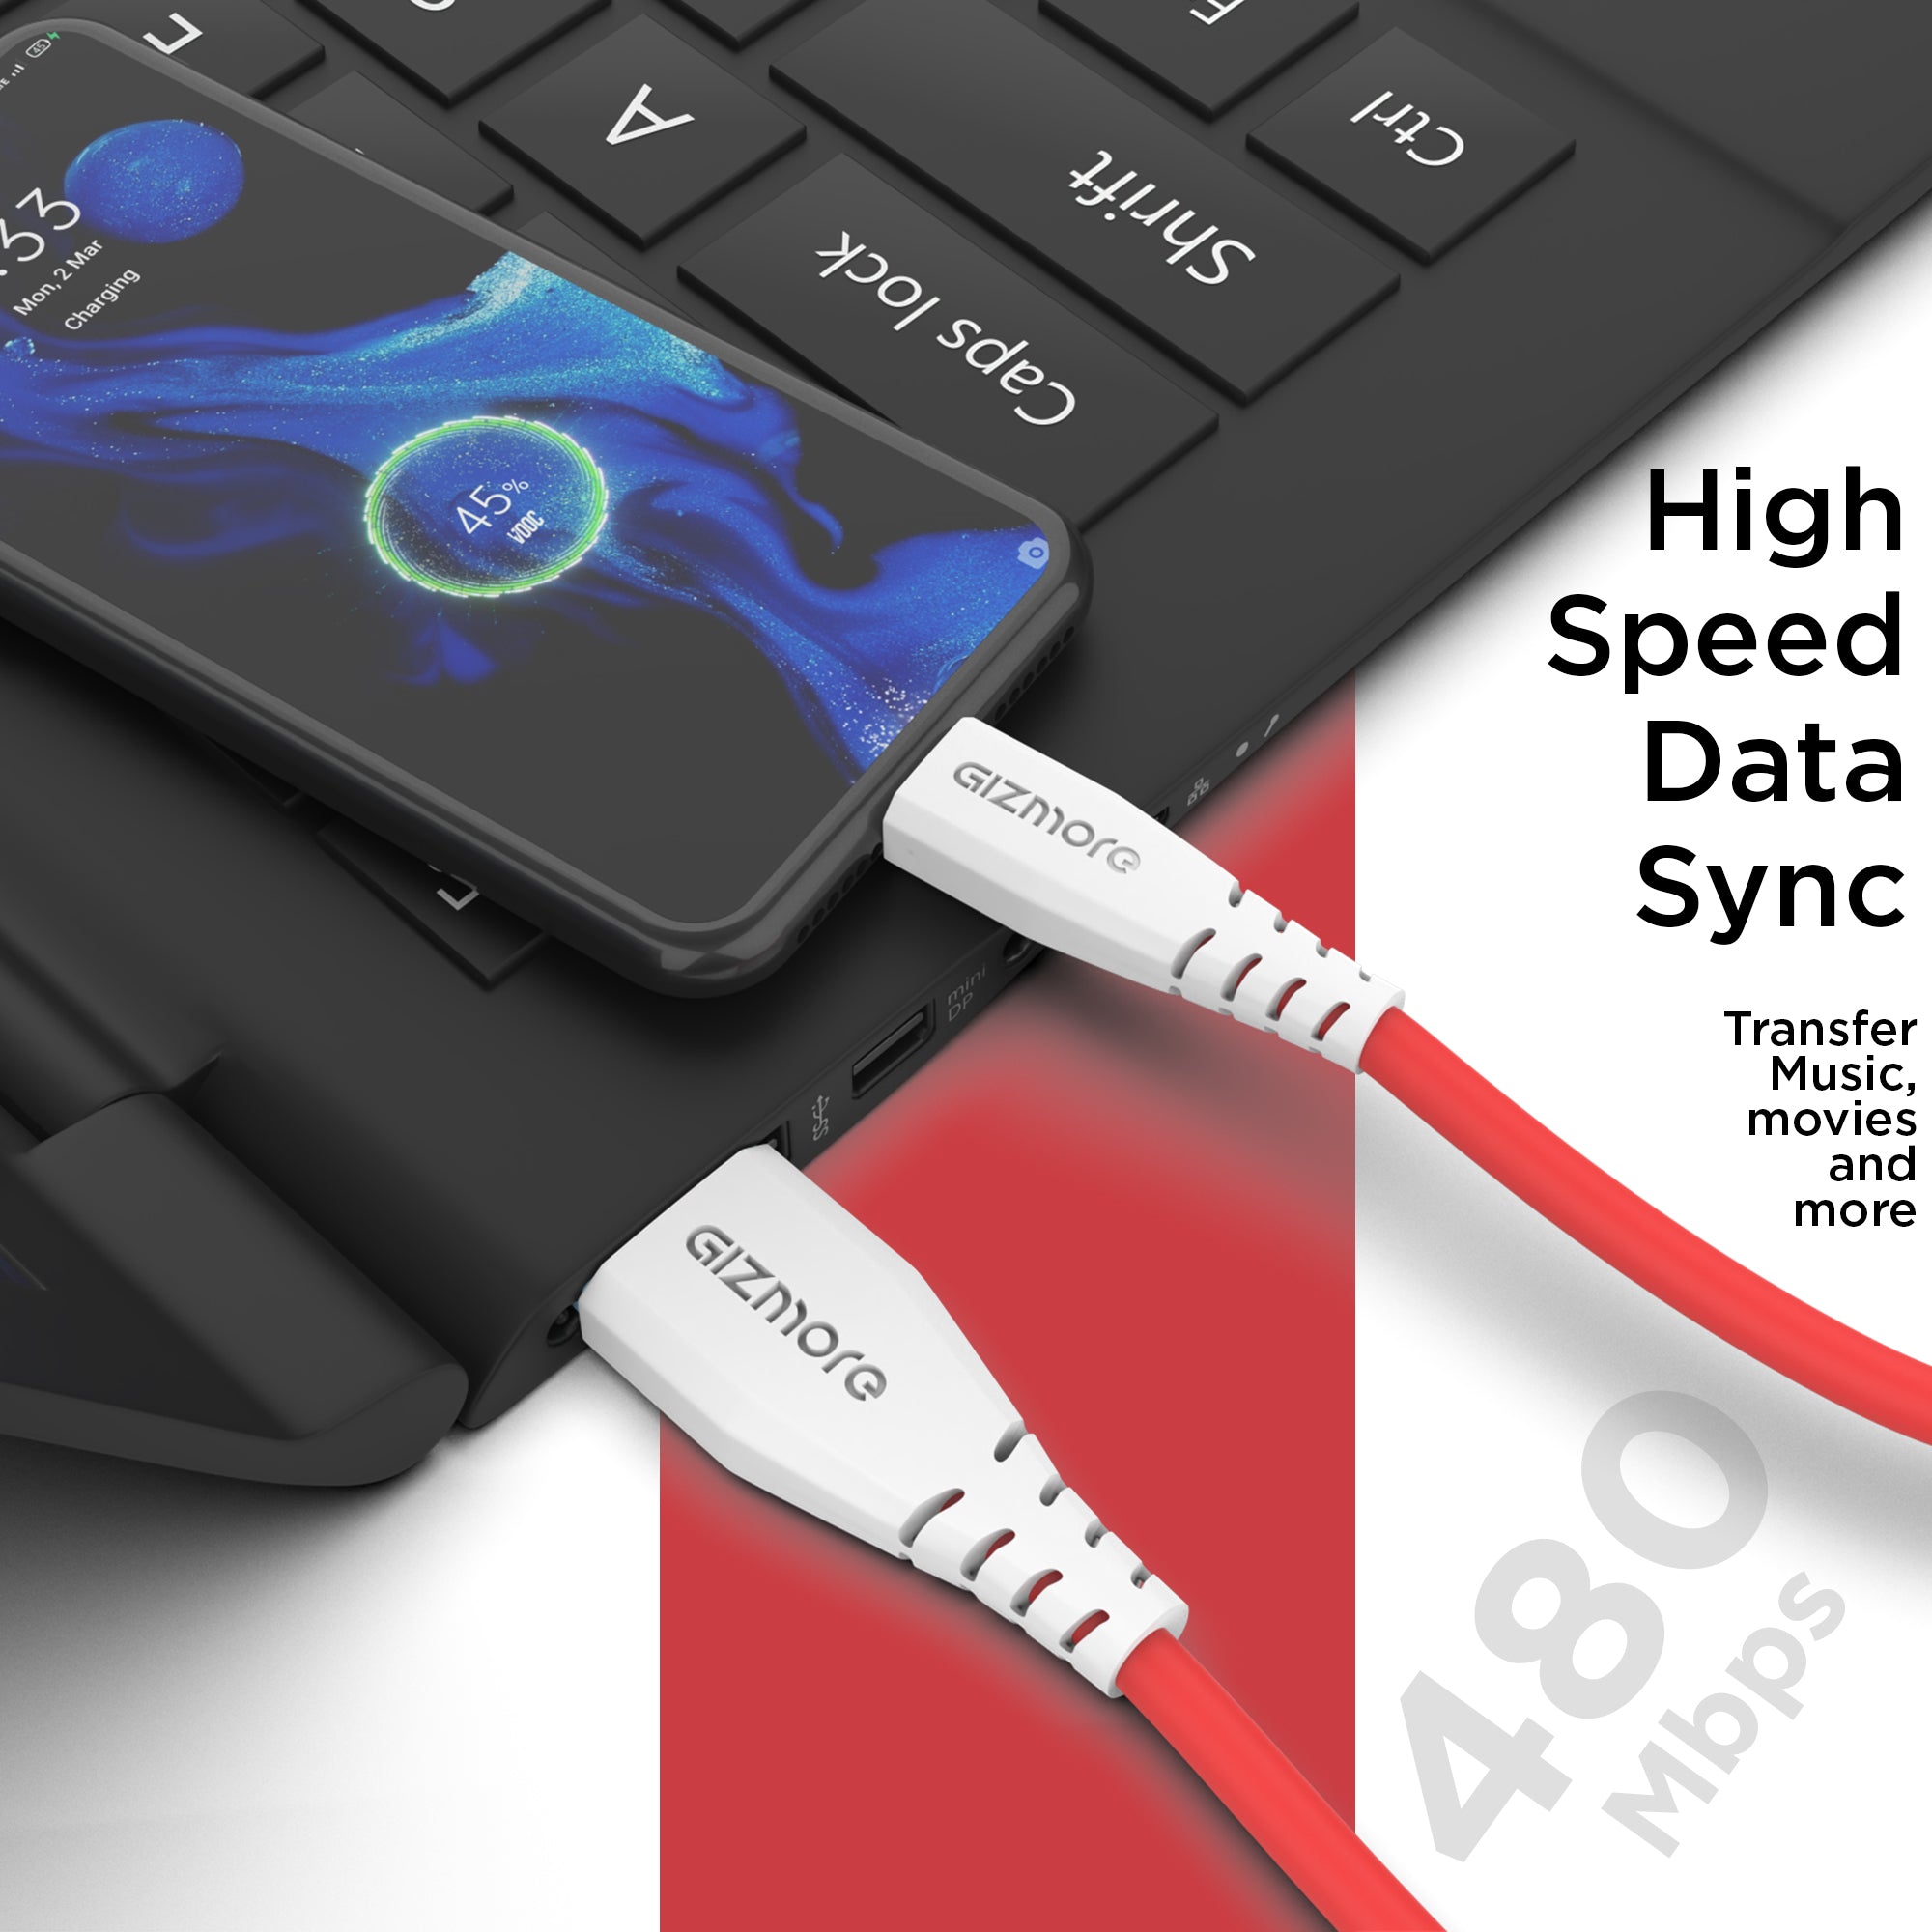 Gizmore WDC151 USB to Type C Fast Carging Cable